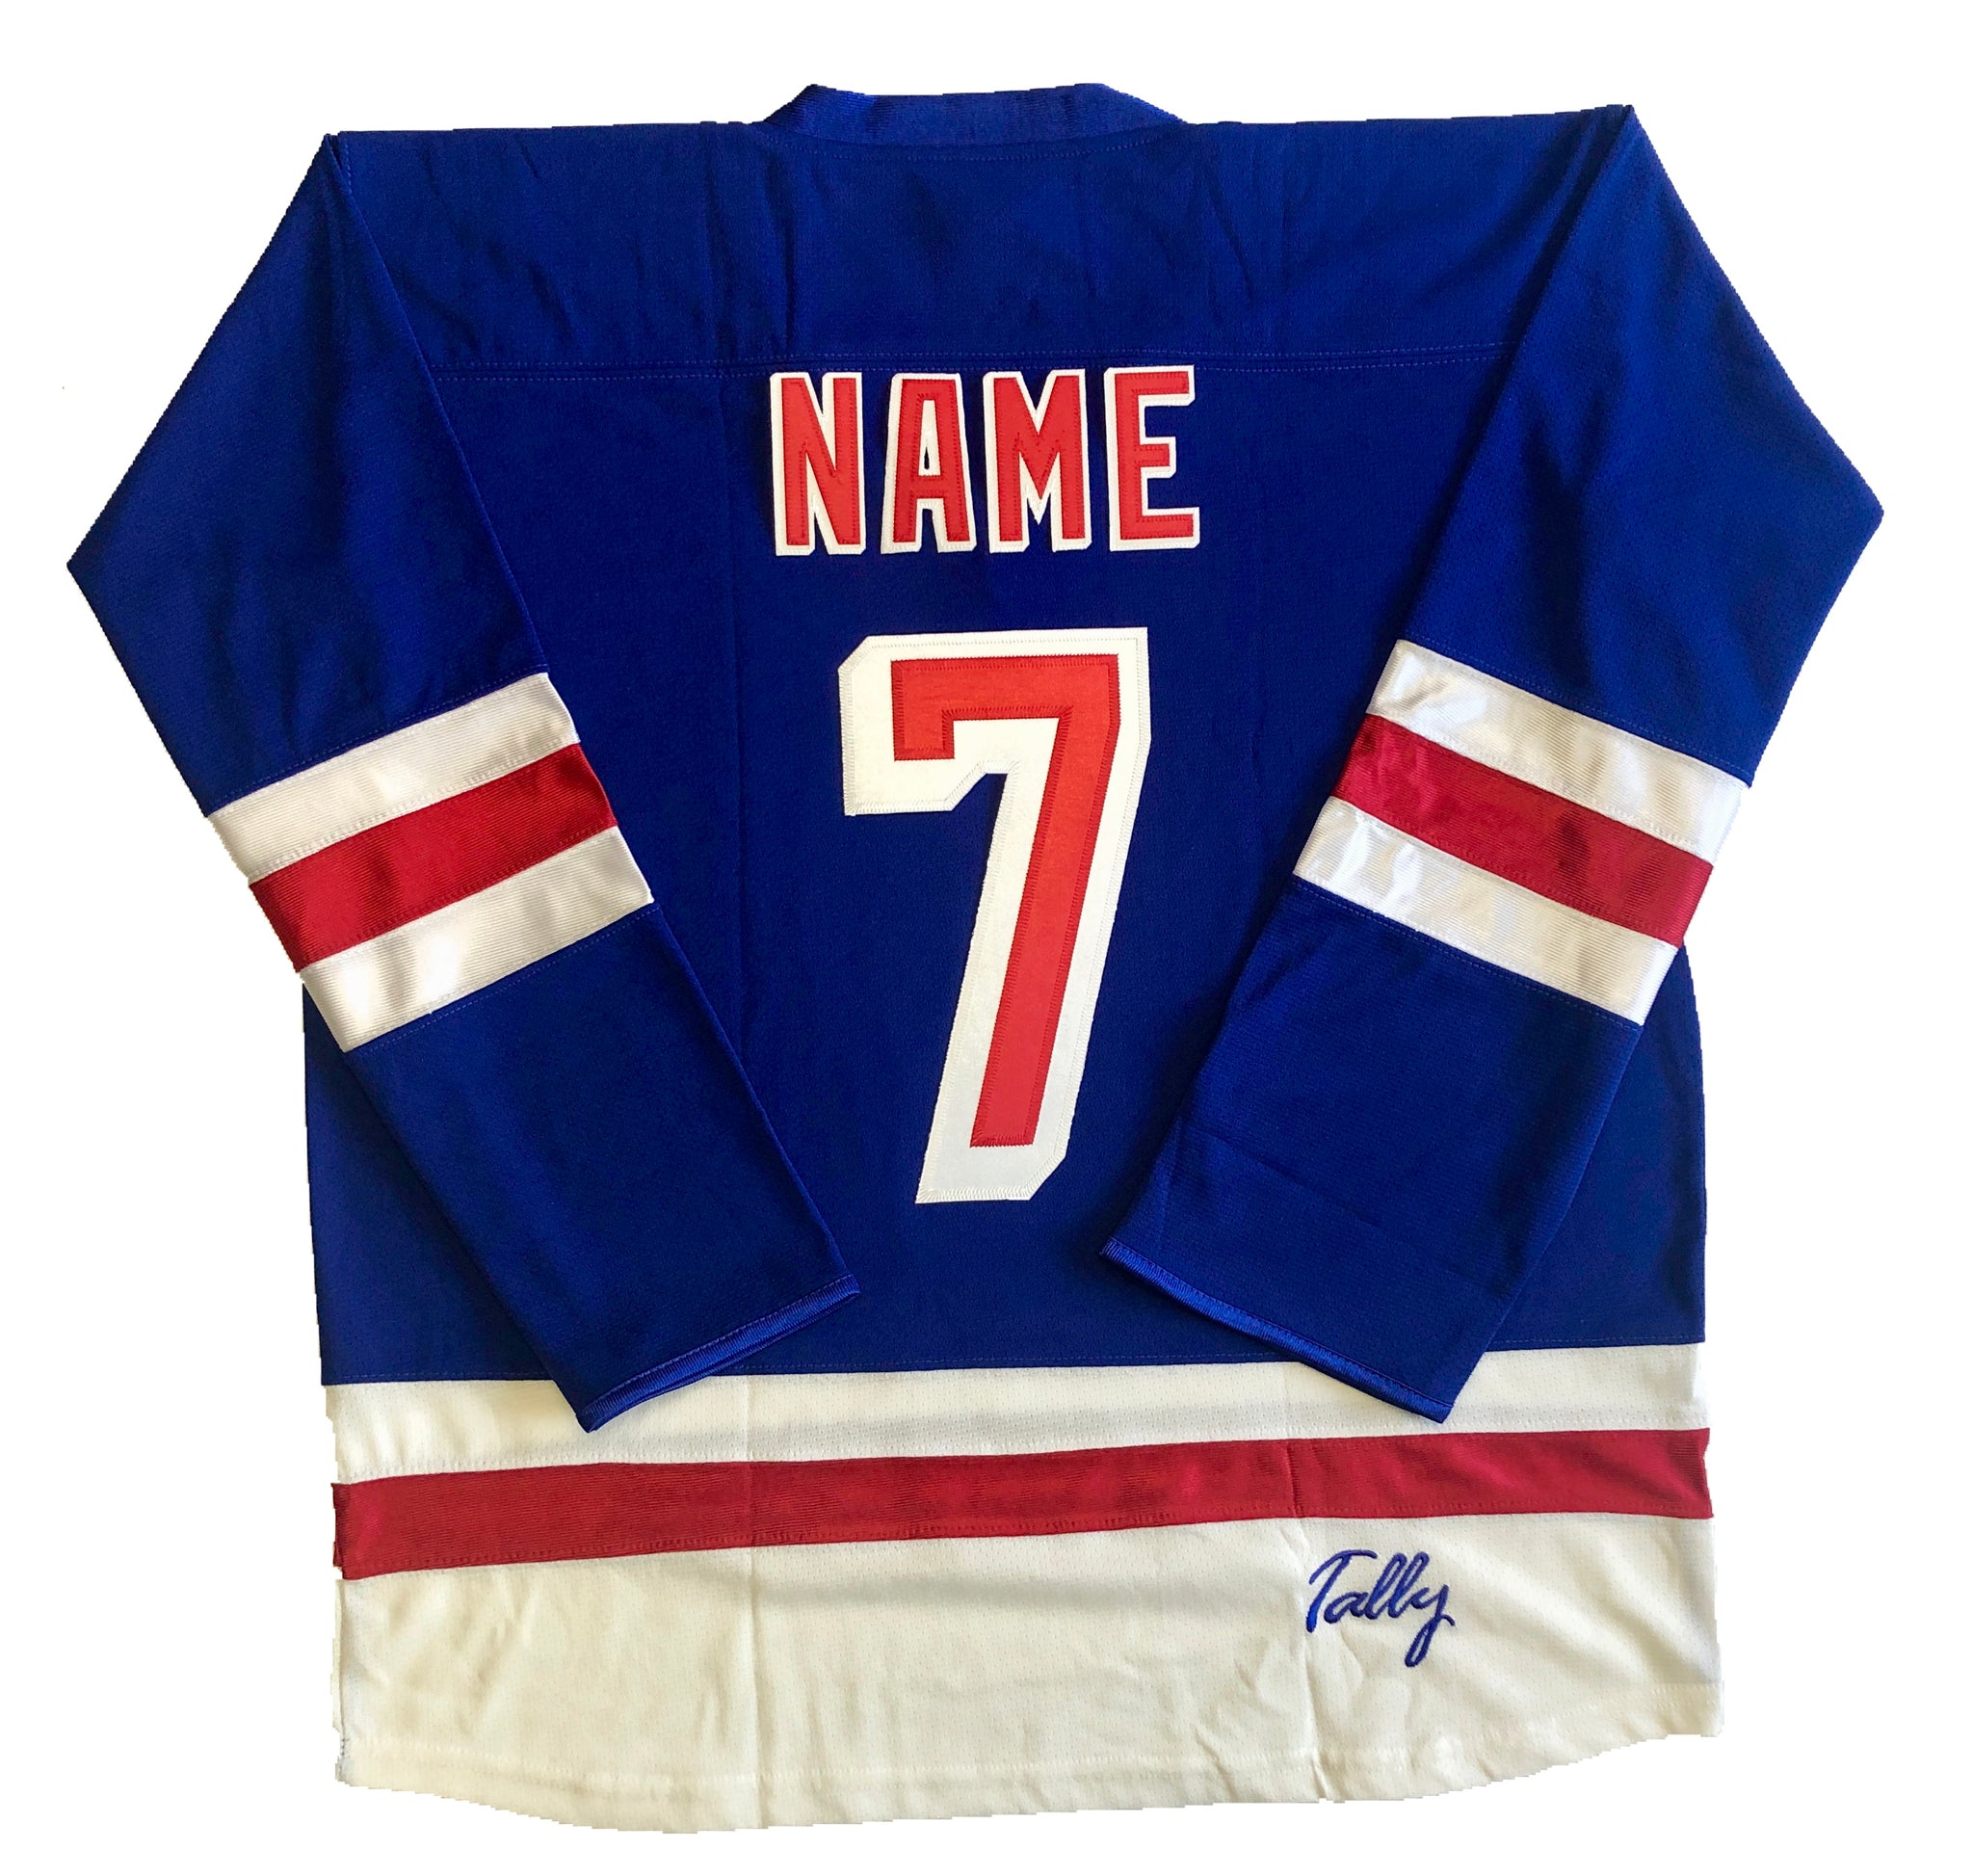 Custom Hockey Jerseys with A Nationals Twill Logo Adult Large / (Number on Back and Sleeves) / Blue